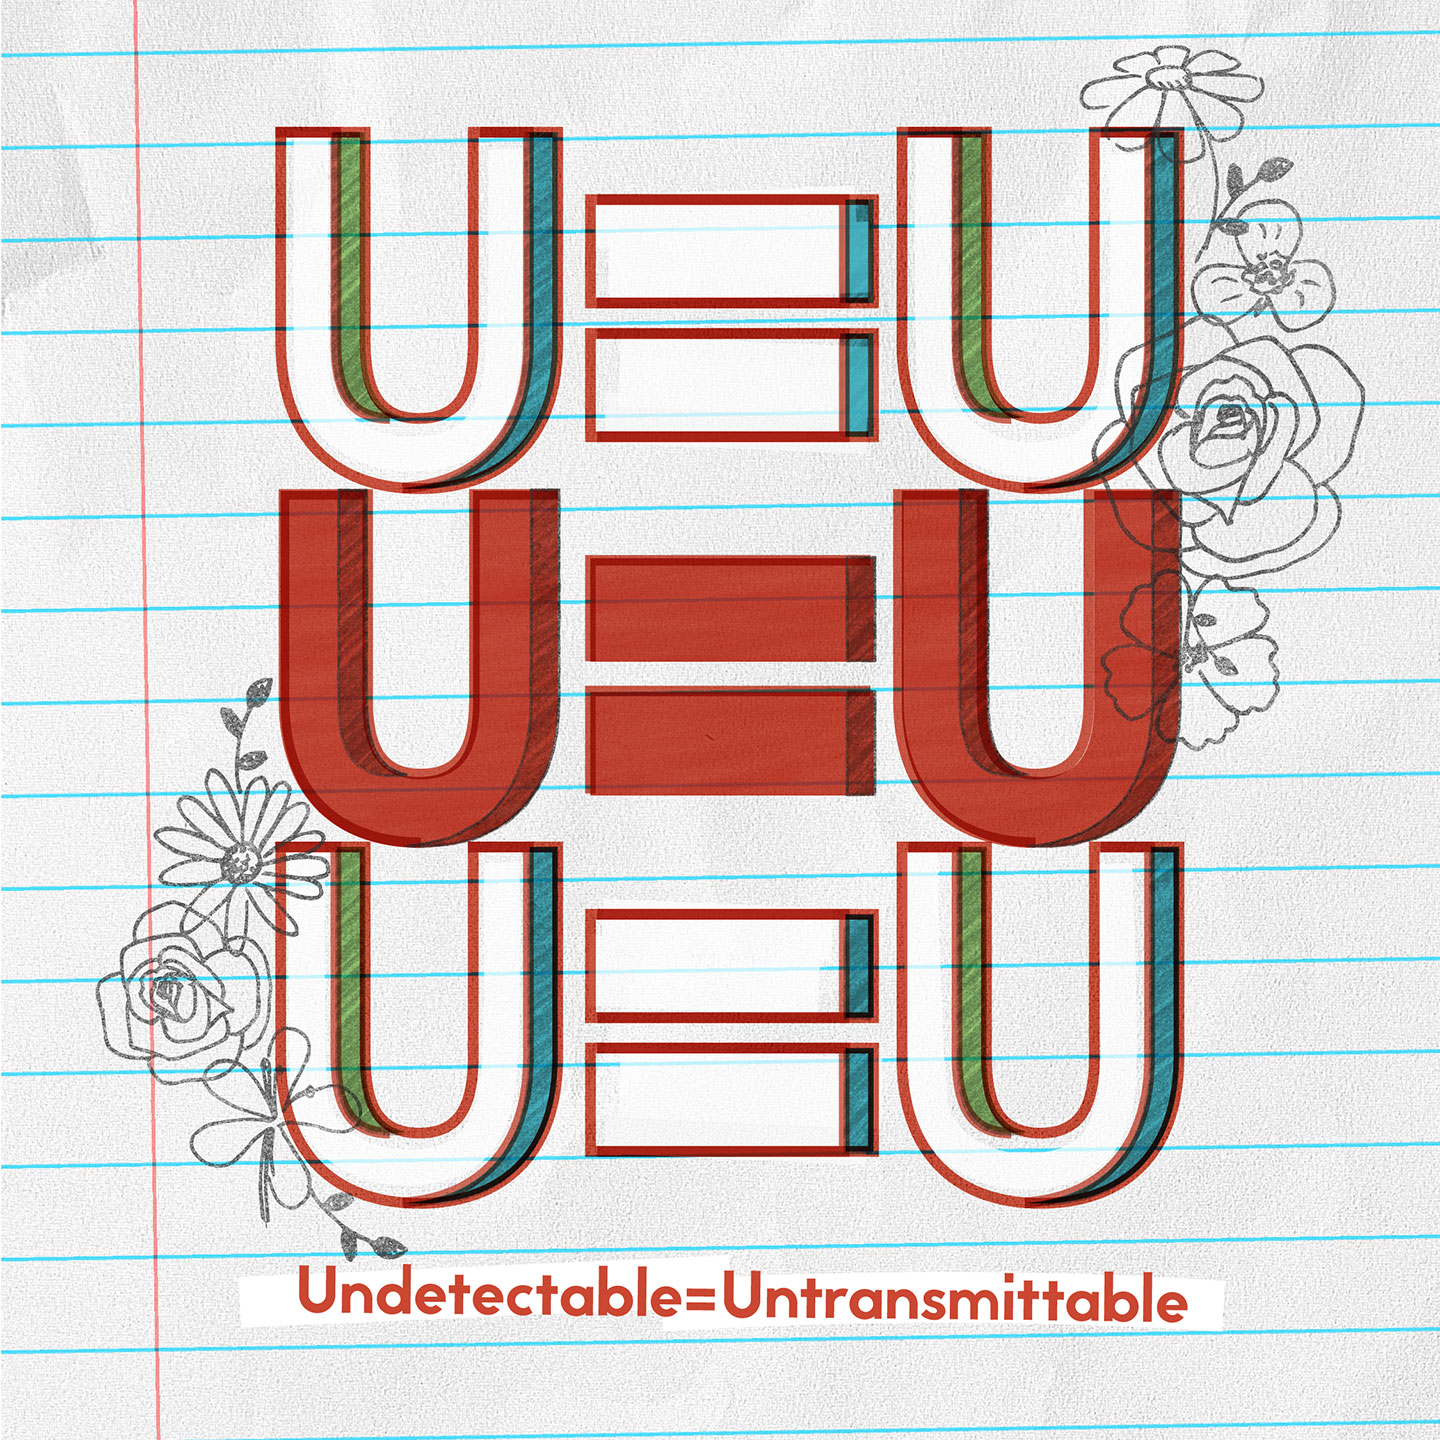 U=U graphic with text: Undetectable = Untransmittable